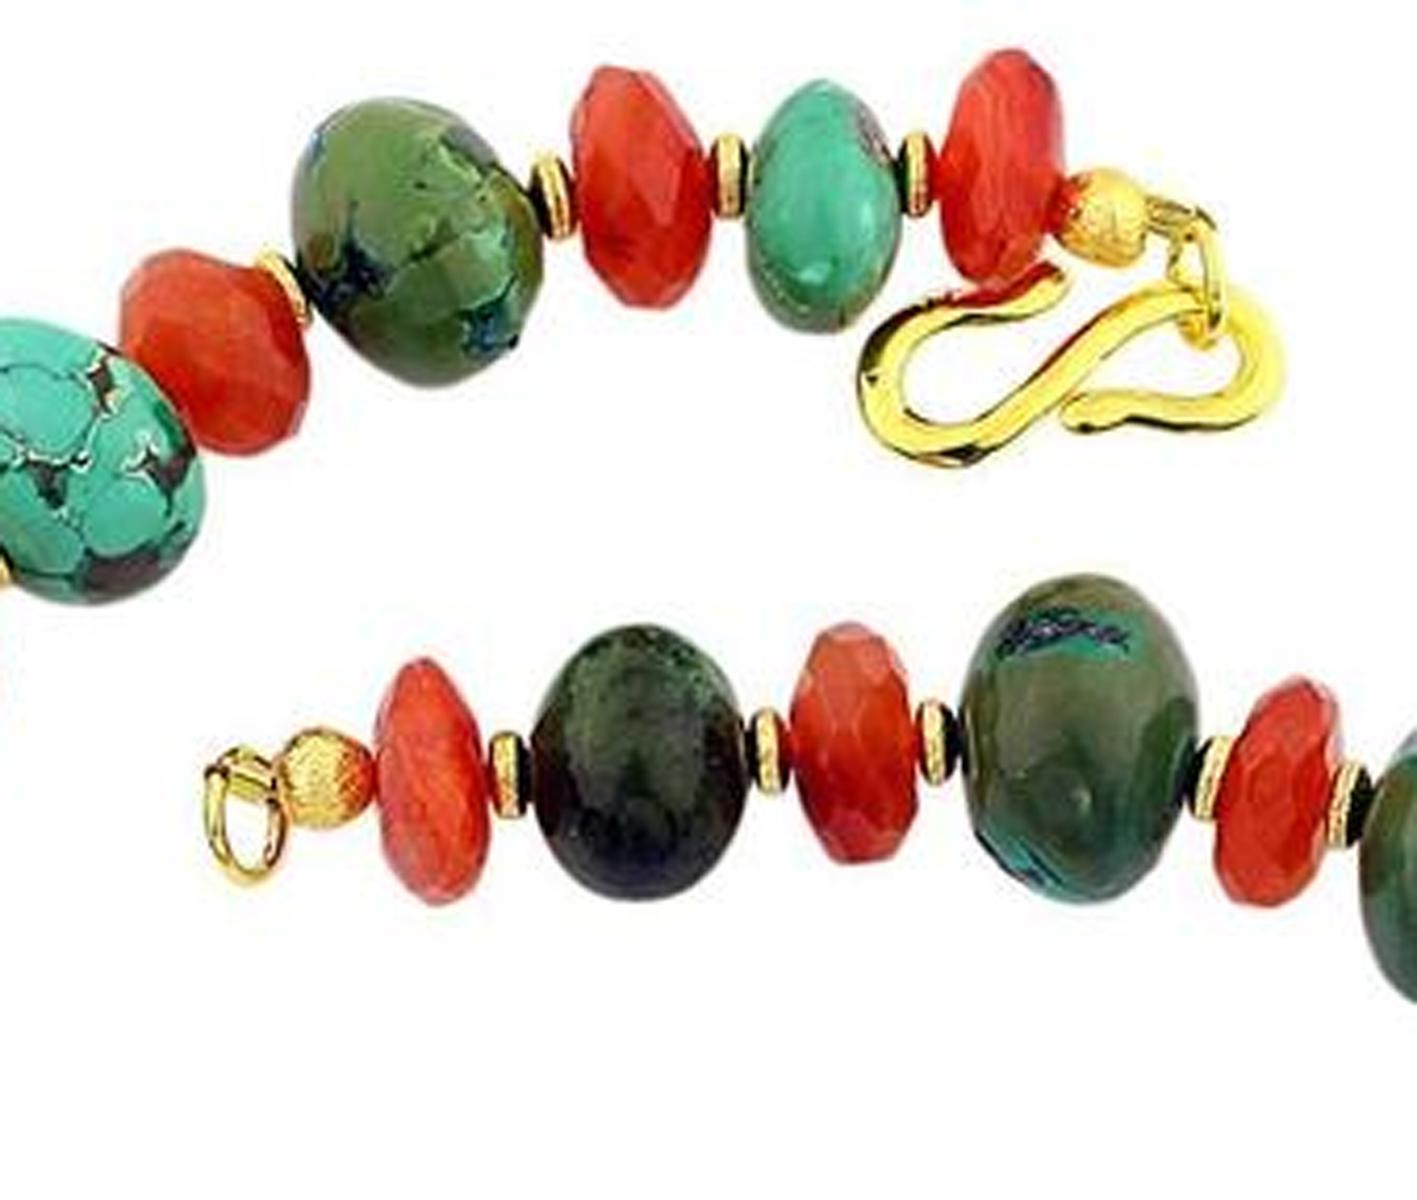 Aria Jewelry Design's natural graduated highly polished Turquoise necklace is enhanced with chunks of gemcut polished glowing real Carnelian and gold plated accents.  Its a comfortable 21 inch length and that focal Turquoise is 41mm x 27.3mm.  The